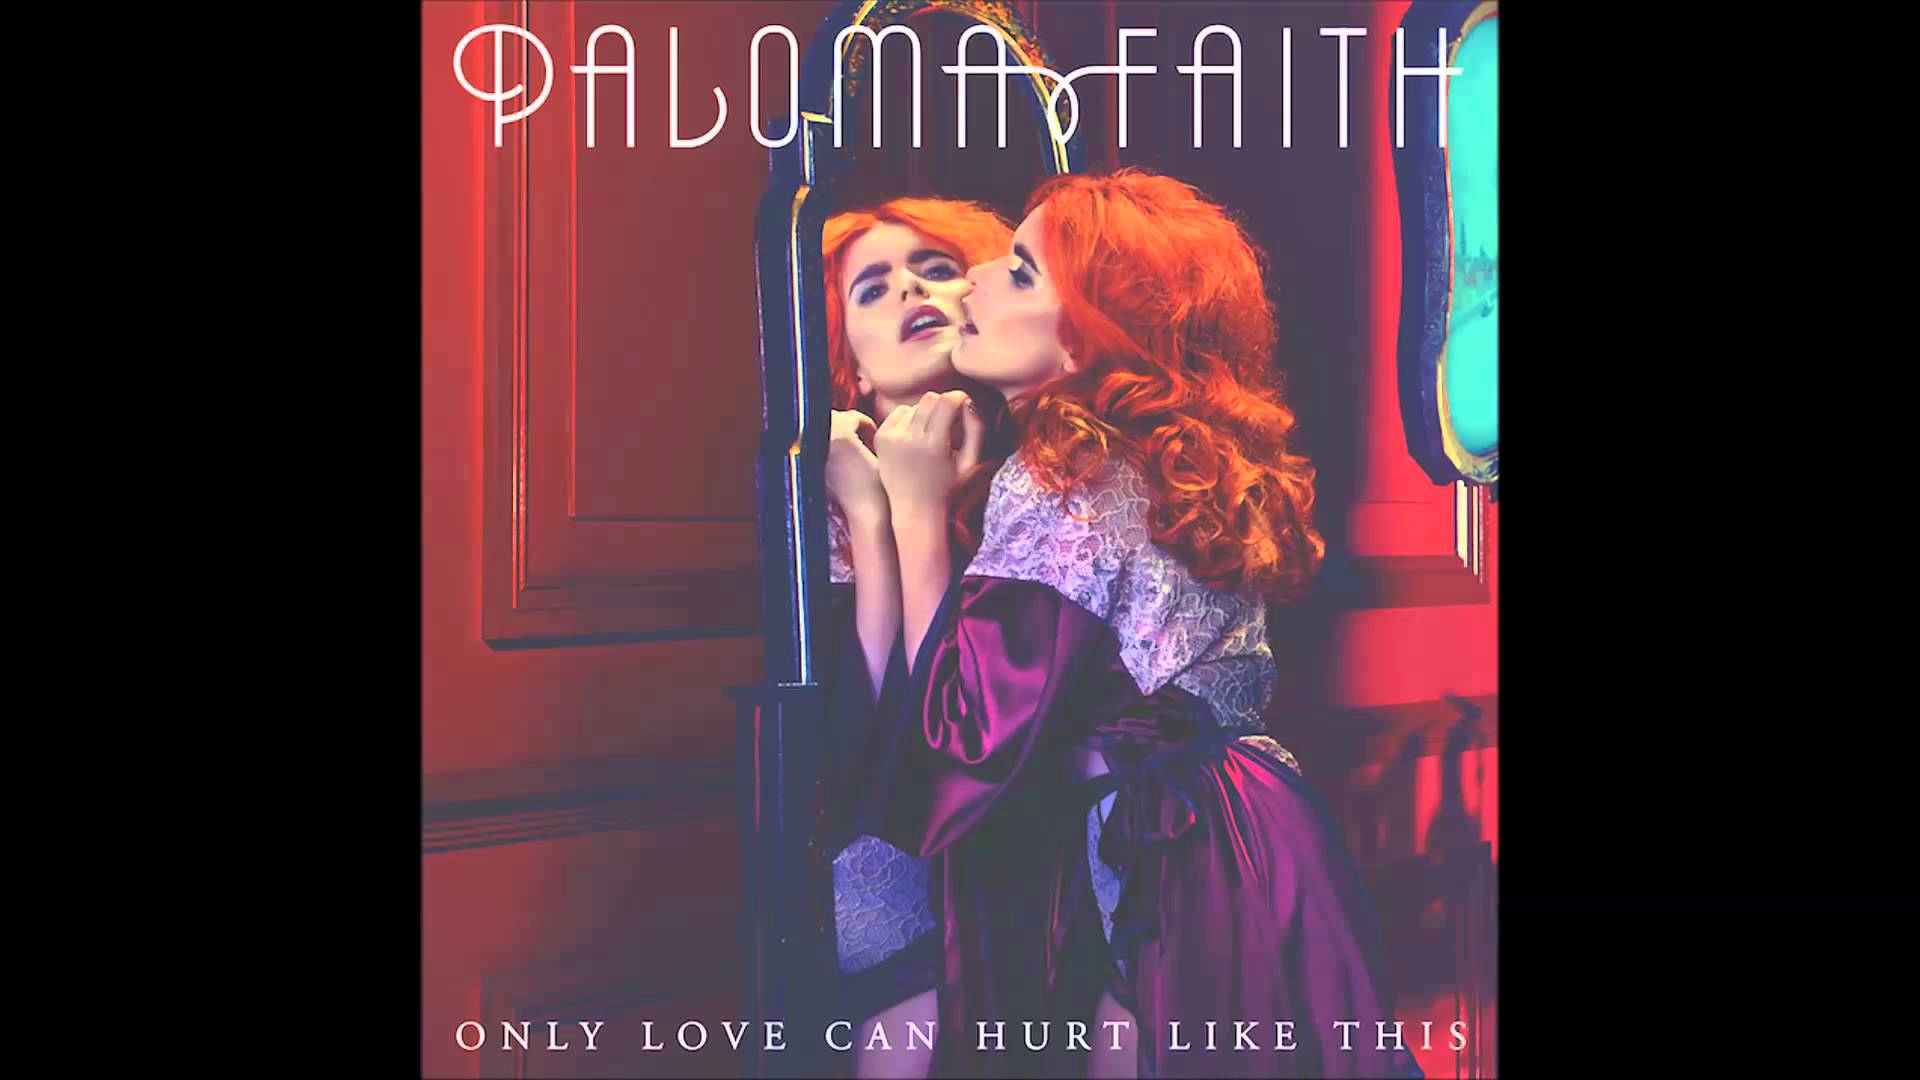 paloma faith - only love can hurt like this